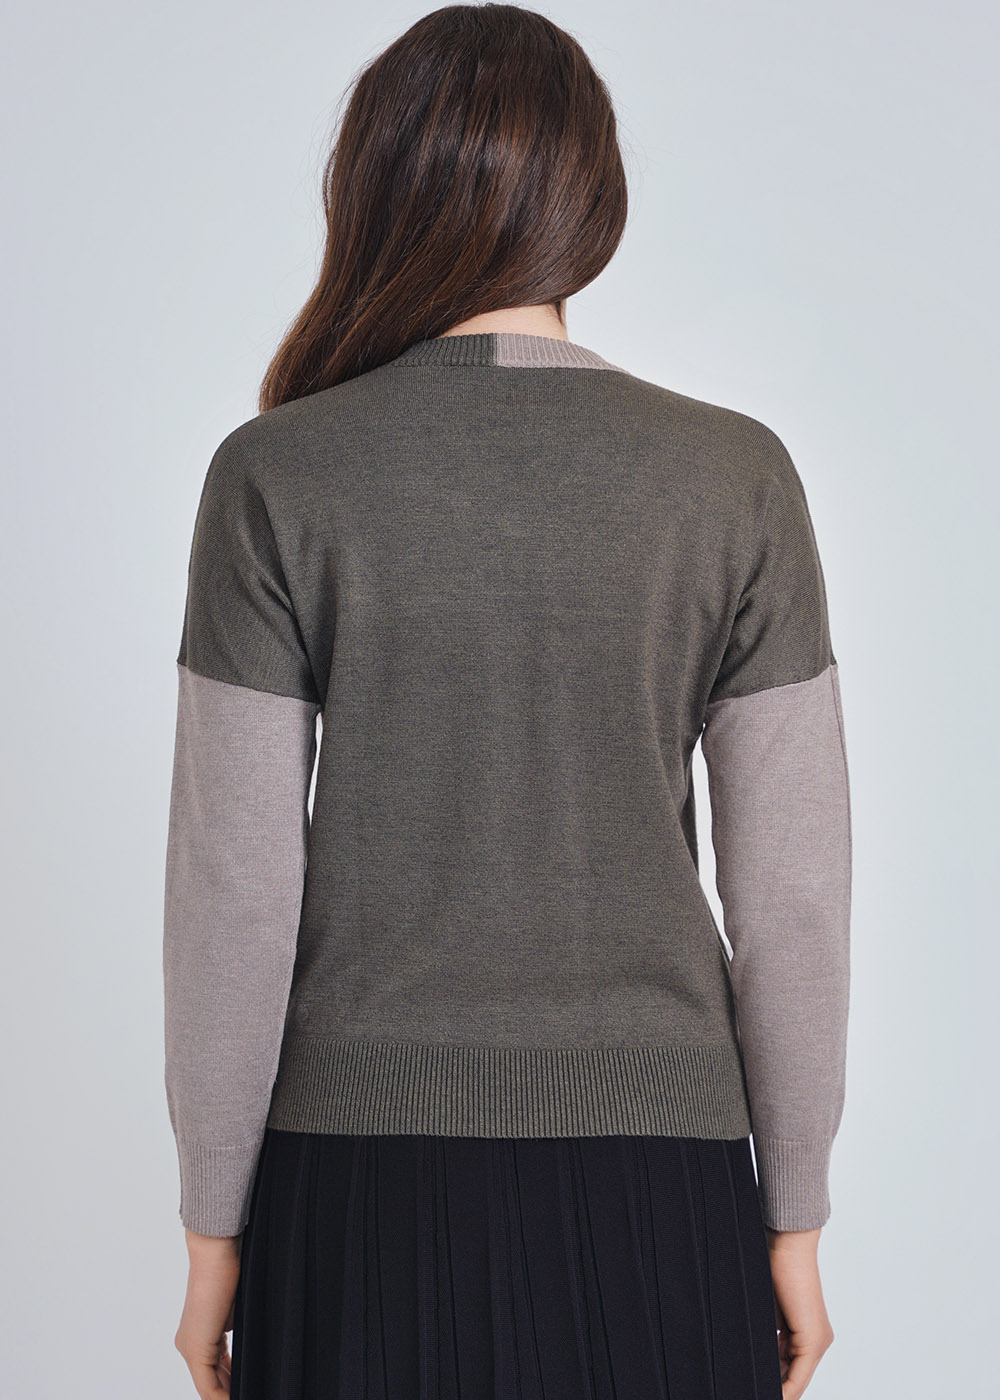 Olive Sweater with Modern Color Block Design